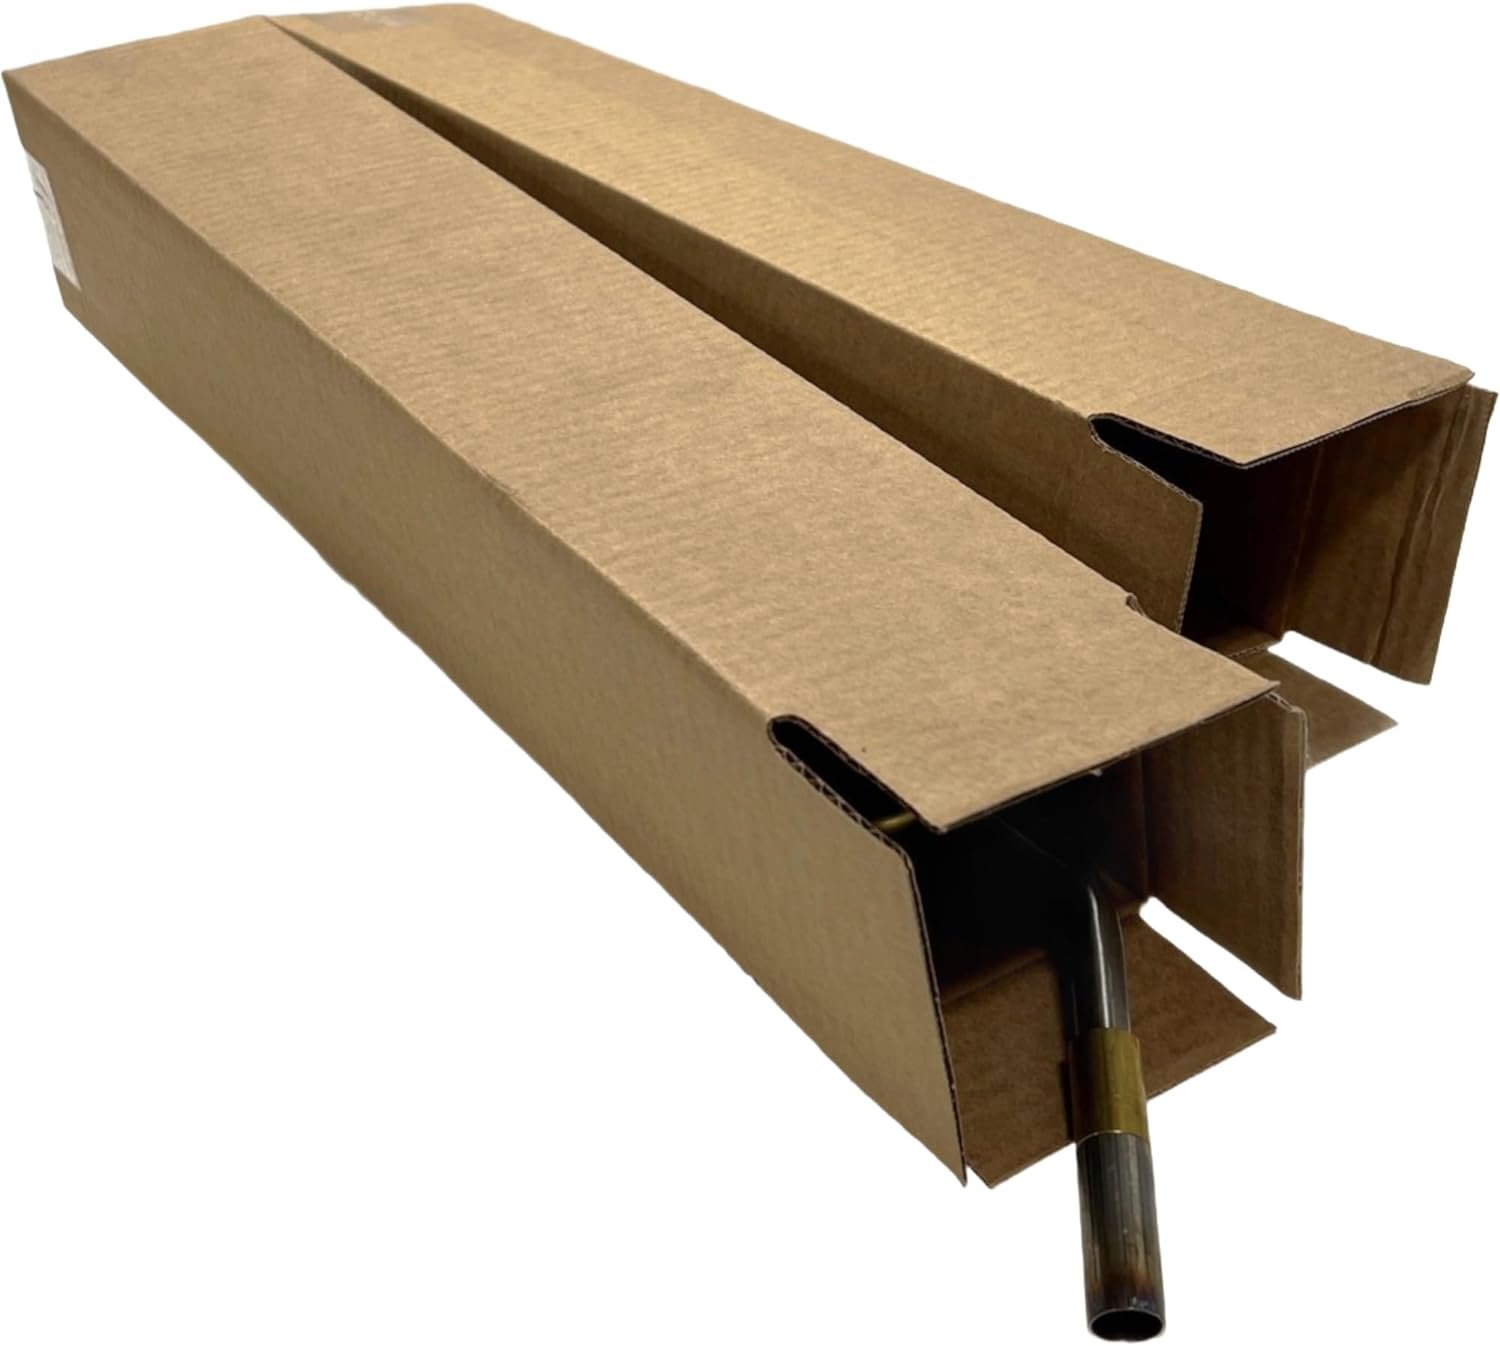 100 4x4x18 Cardboard Paper Boxes Mailing Packing Shipping Box Corrugated Carton